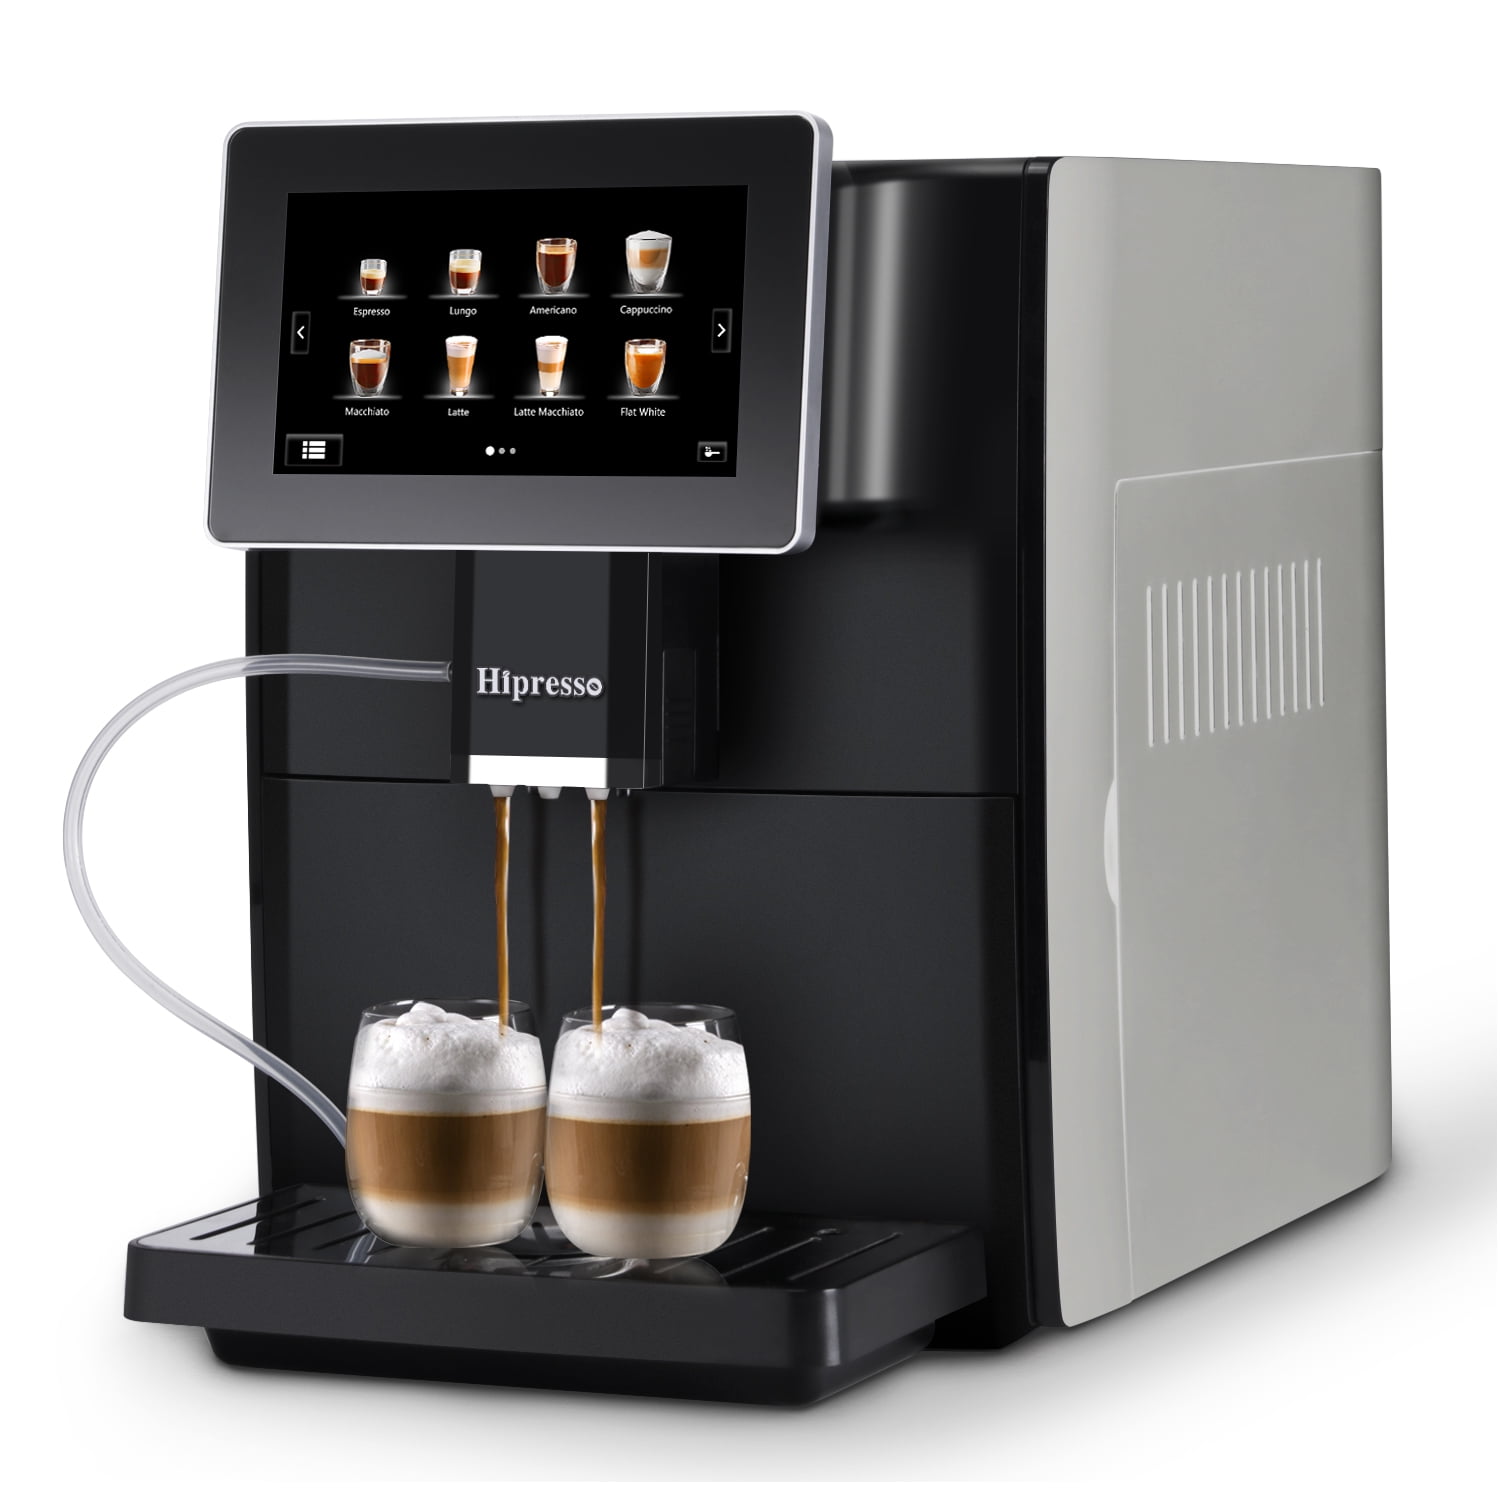 Mcilpoog Super-Automatic Espresso Coffee Machine with Smart Touch Screen for Brewing 16 Coffee Drinks WS-203